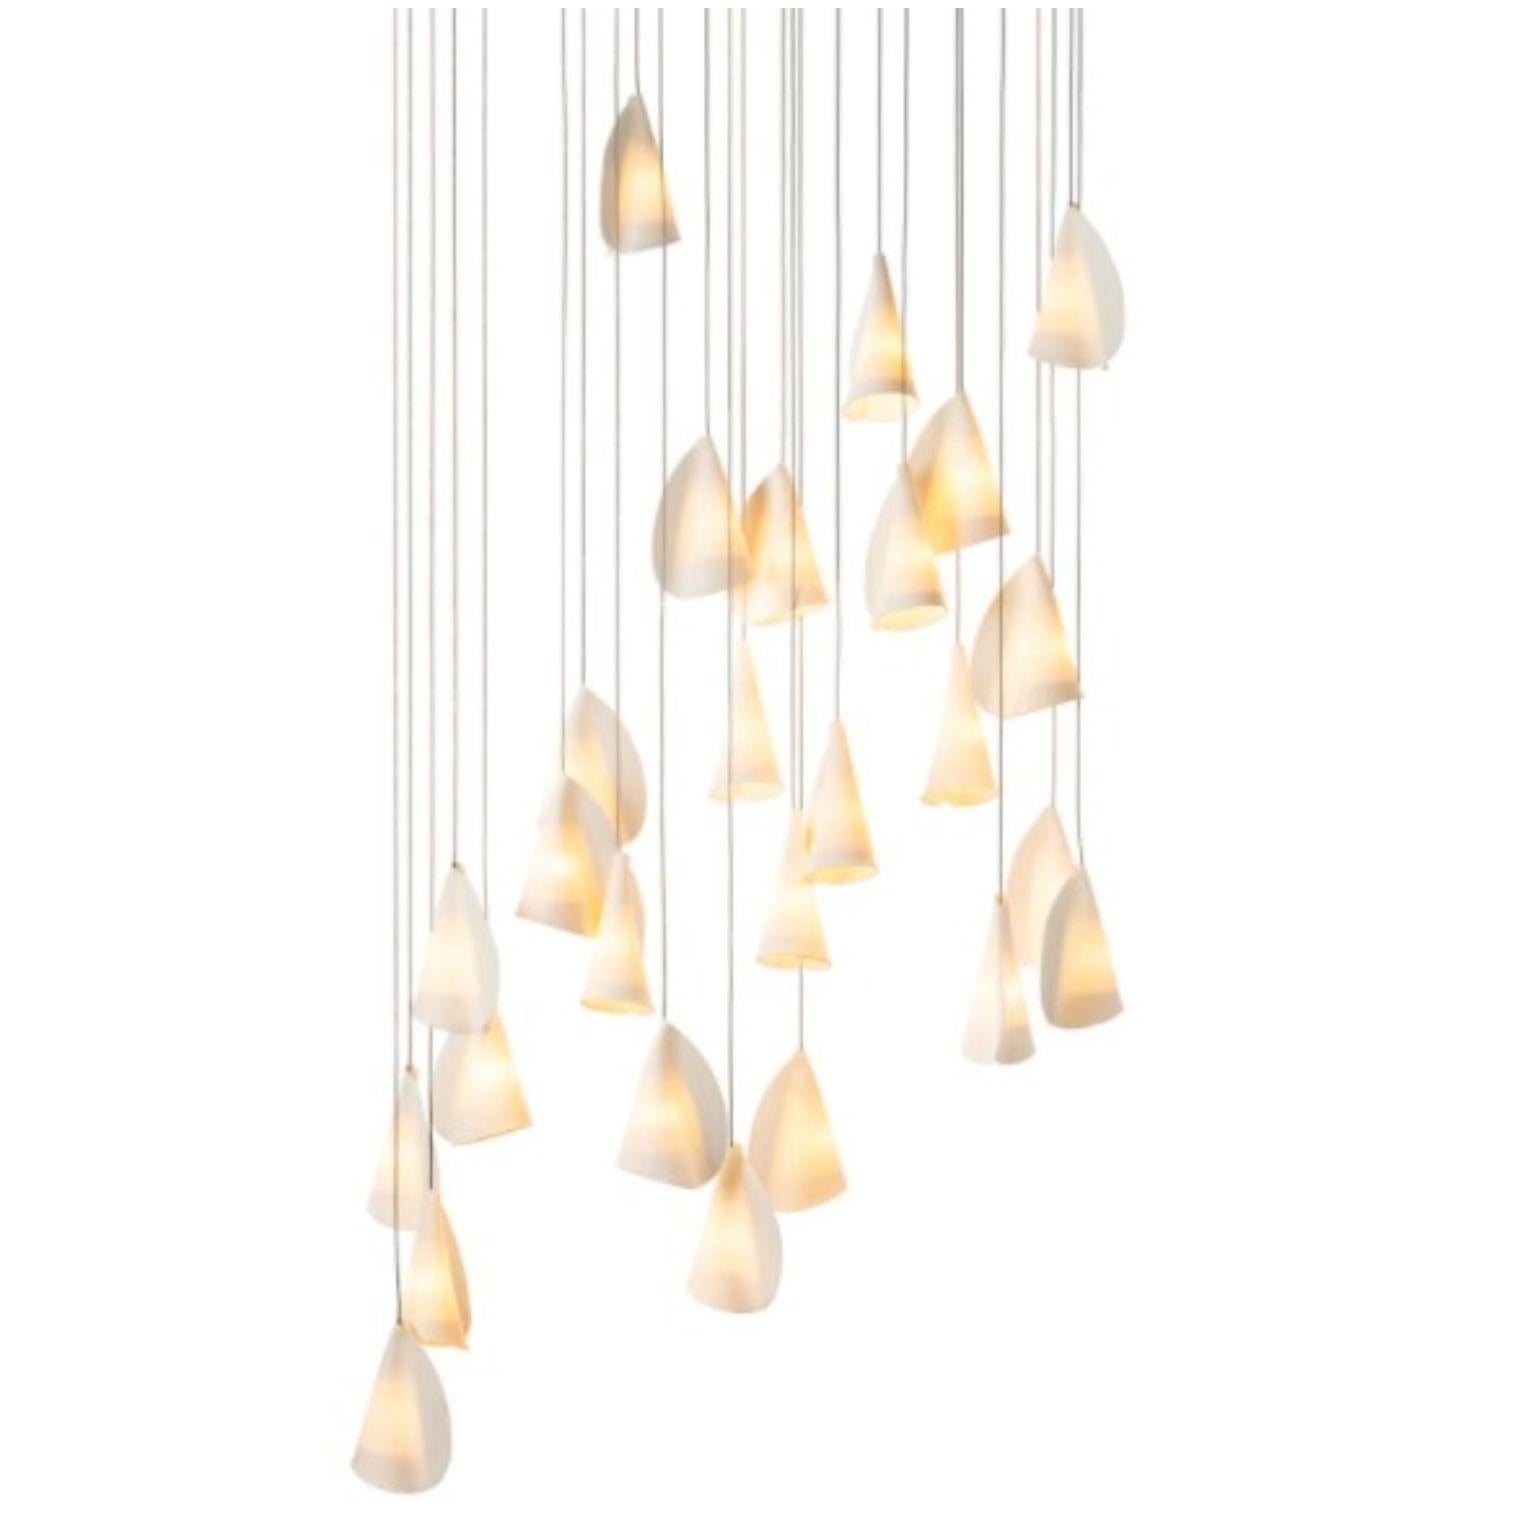 21.26 Pendant by Bocci
Dimensions: D60 x H300 cm
Materials: white powder, coated square canopy
Weight:25 kg
Also Available in different dimensions.

All our lamps can be wired according to each country. If sold to the USA it will be wired for